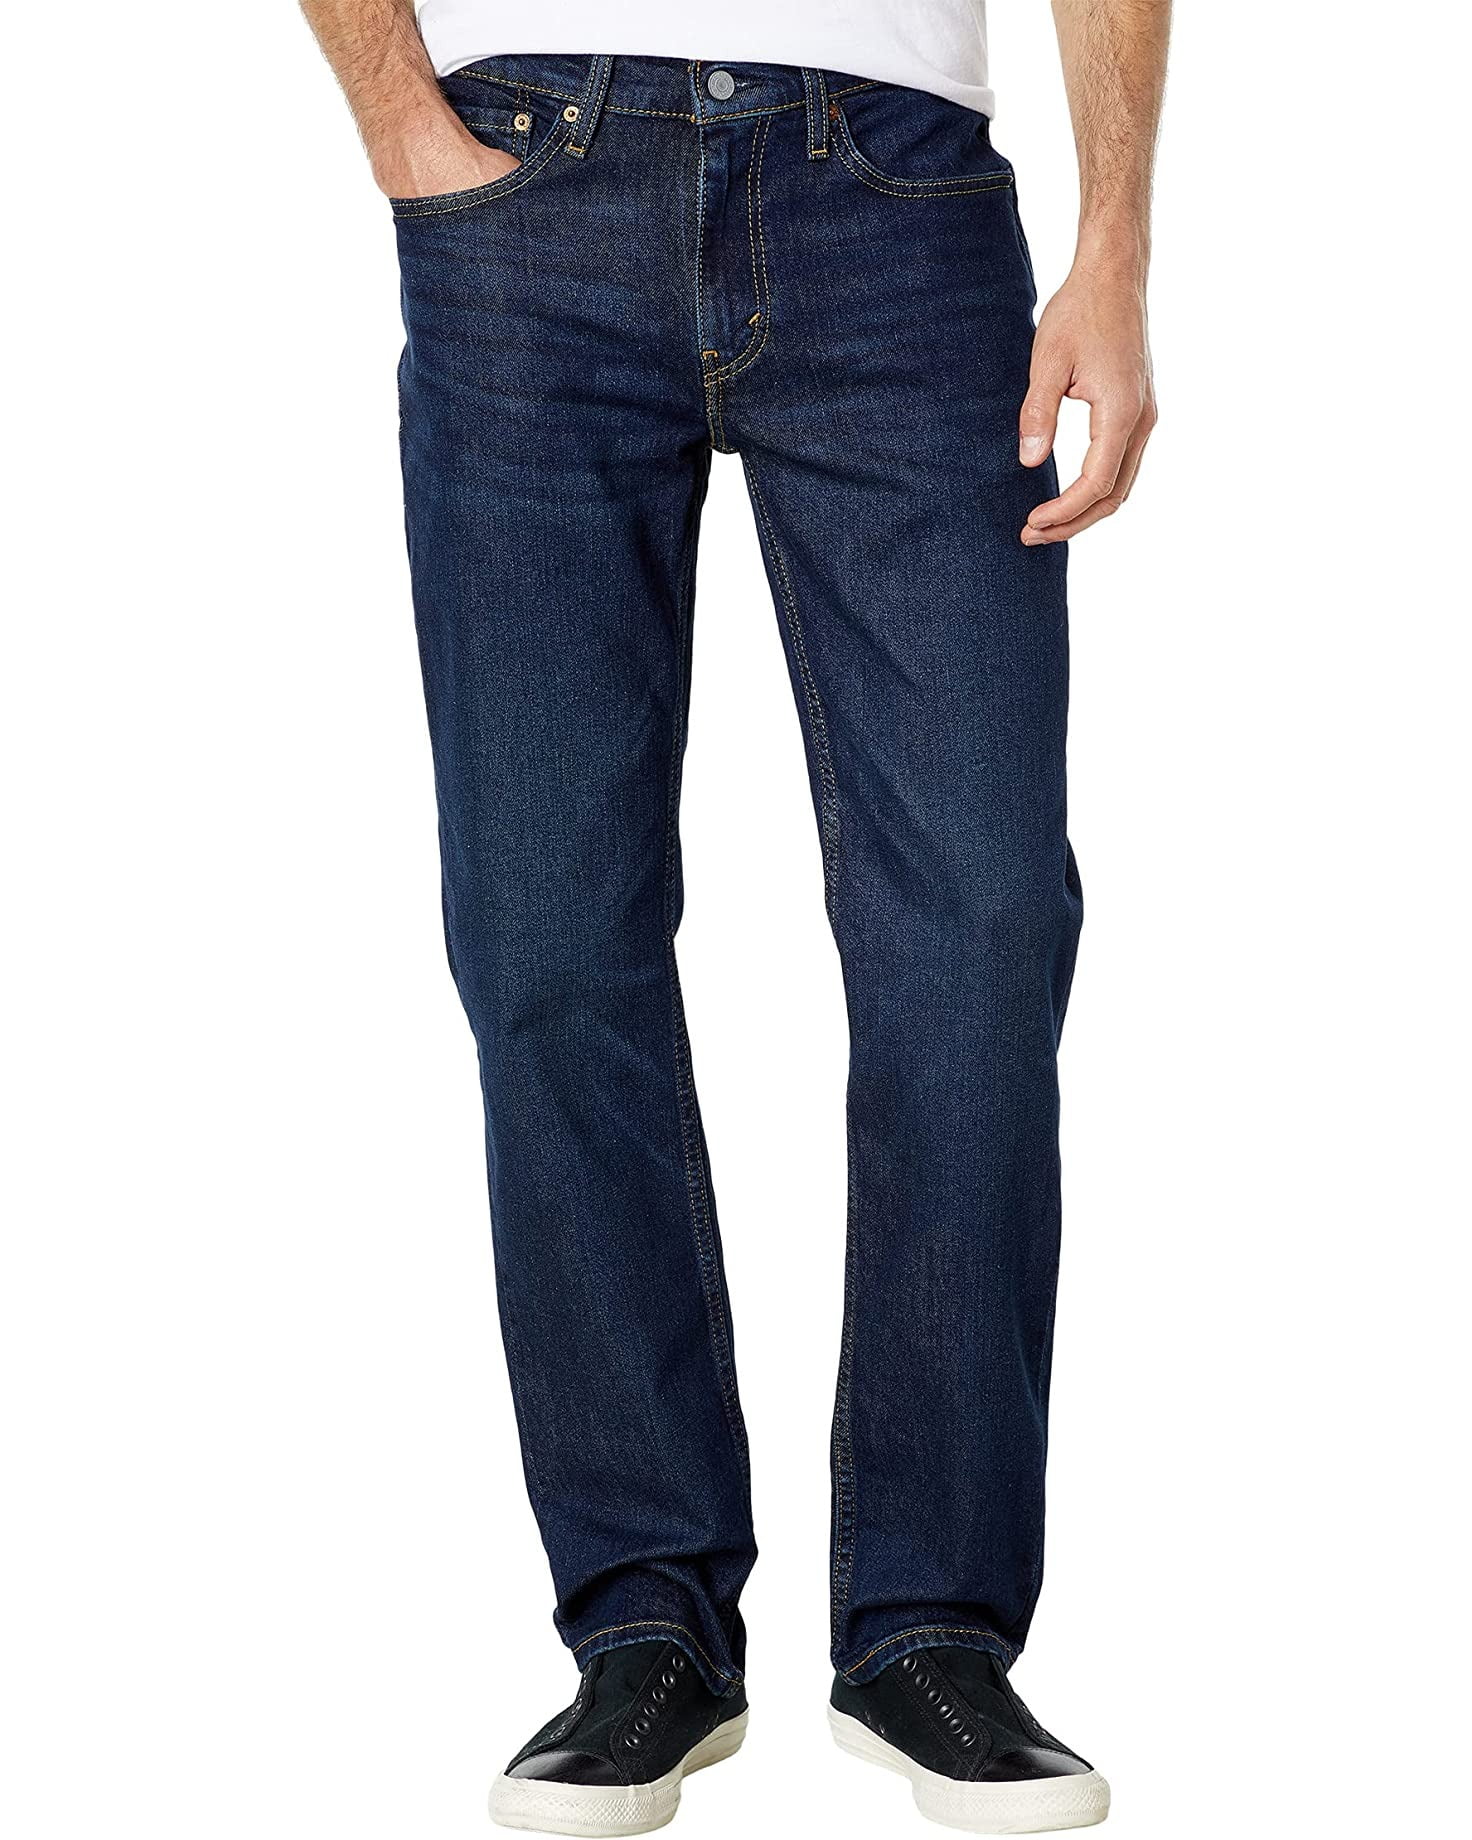 Levi's CLEAN RUN Men's 514 Straight Fit Eco Performance Jeans, US 33x30